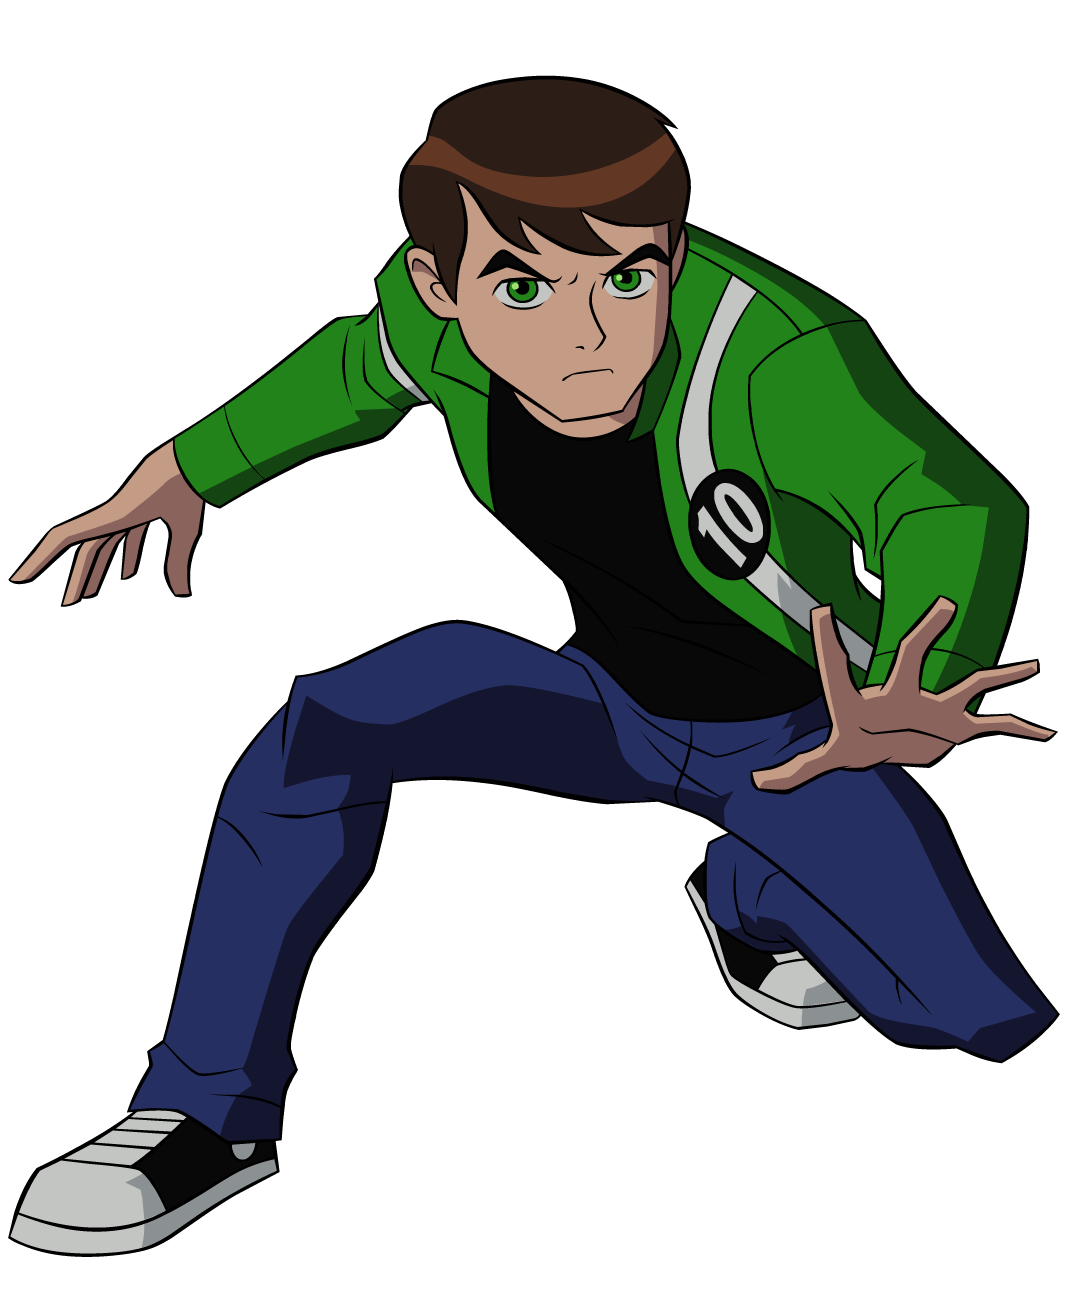 Ben 10 Picture - Image Abyss